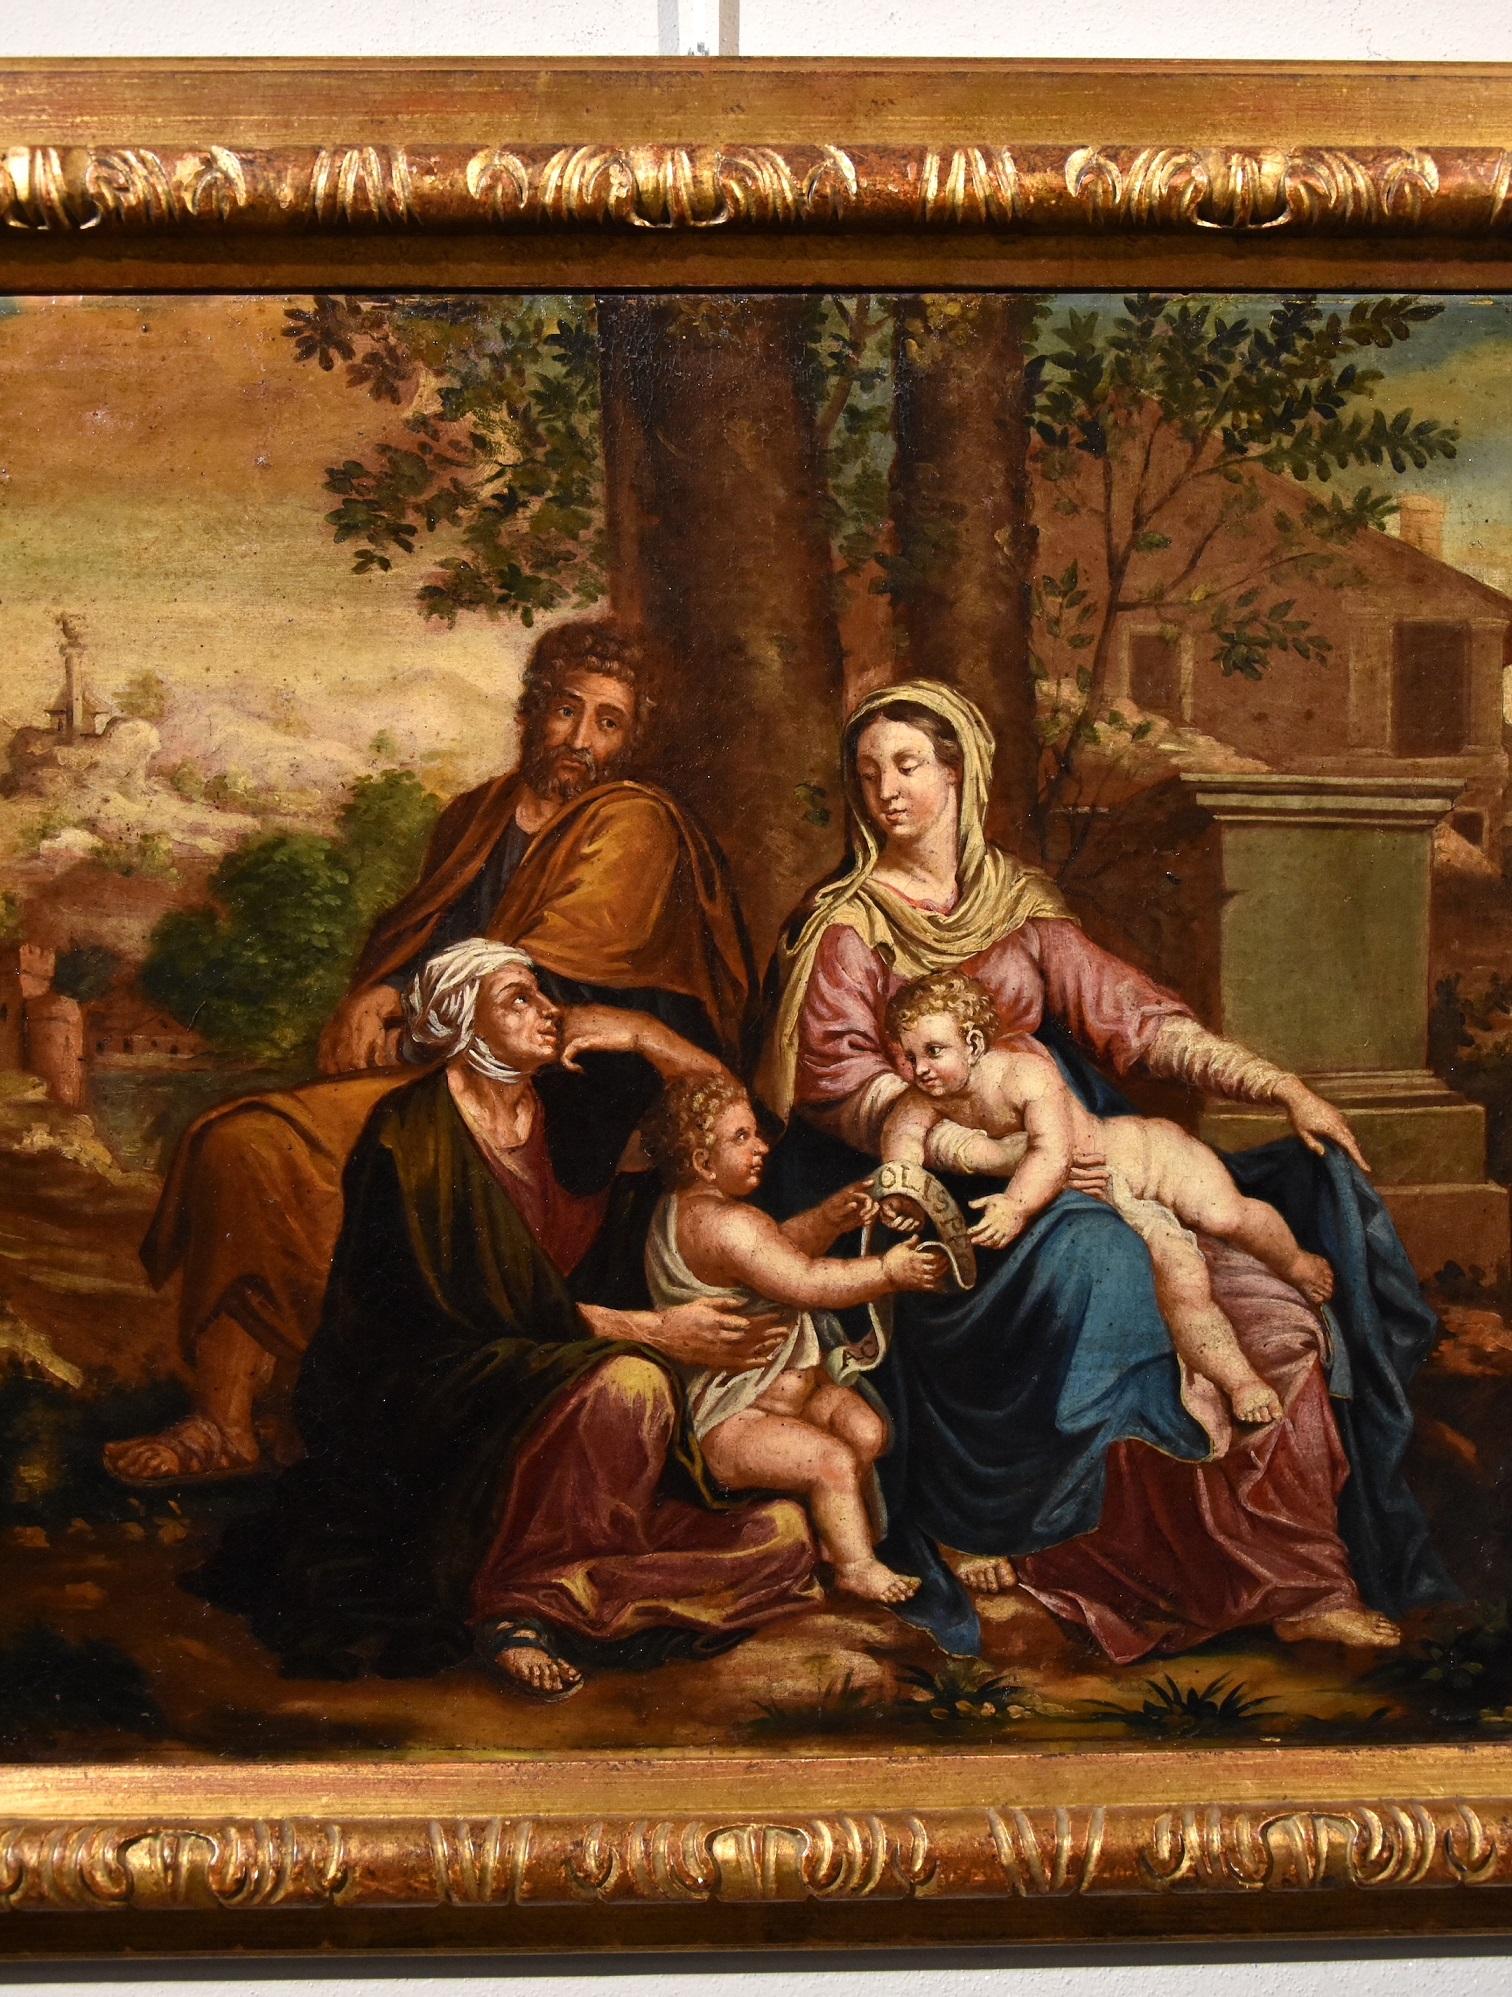 Nicolas Poussin (Les Andelys 1594 - Rome 1665), Circle of
Holy Family with Saint Elizabeth and Saint John the Baptist in a landscape

Oil painting on canvas
56 x 68 cm.
in frame 72 x 85 cm.

We present this splendid work that depicts the episode,